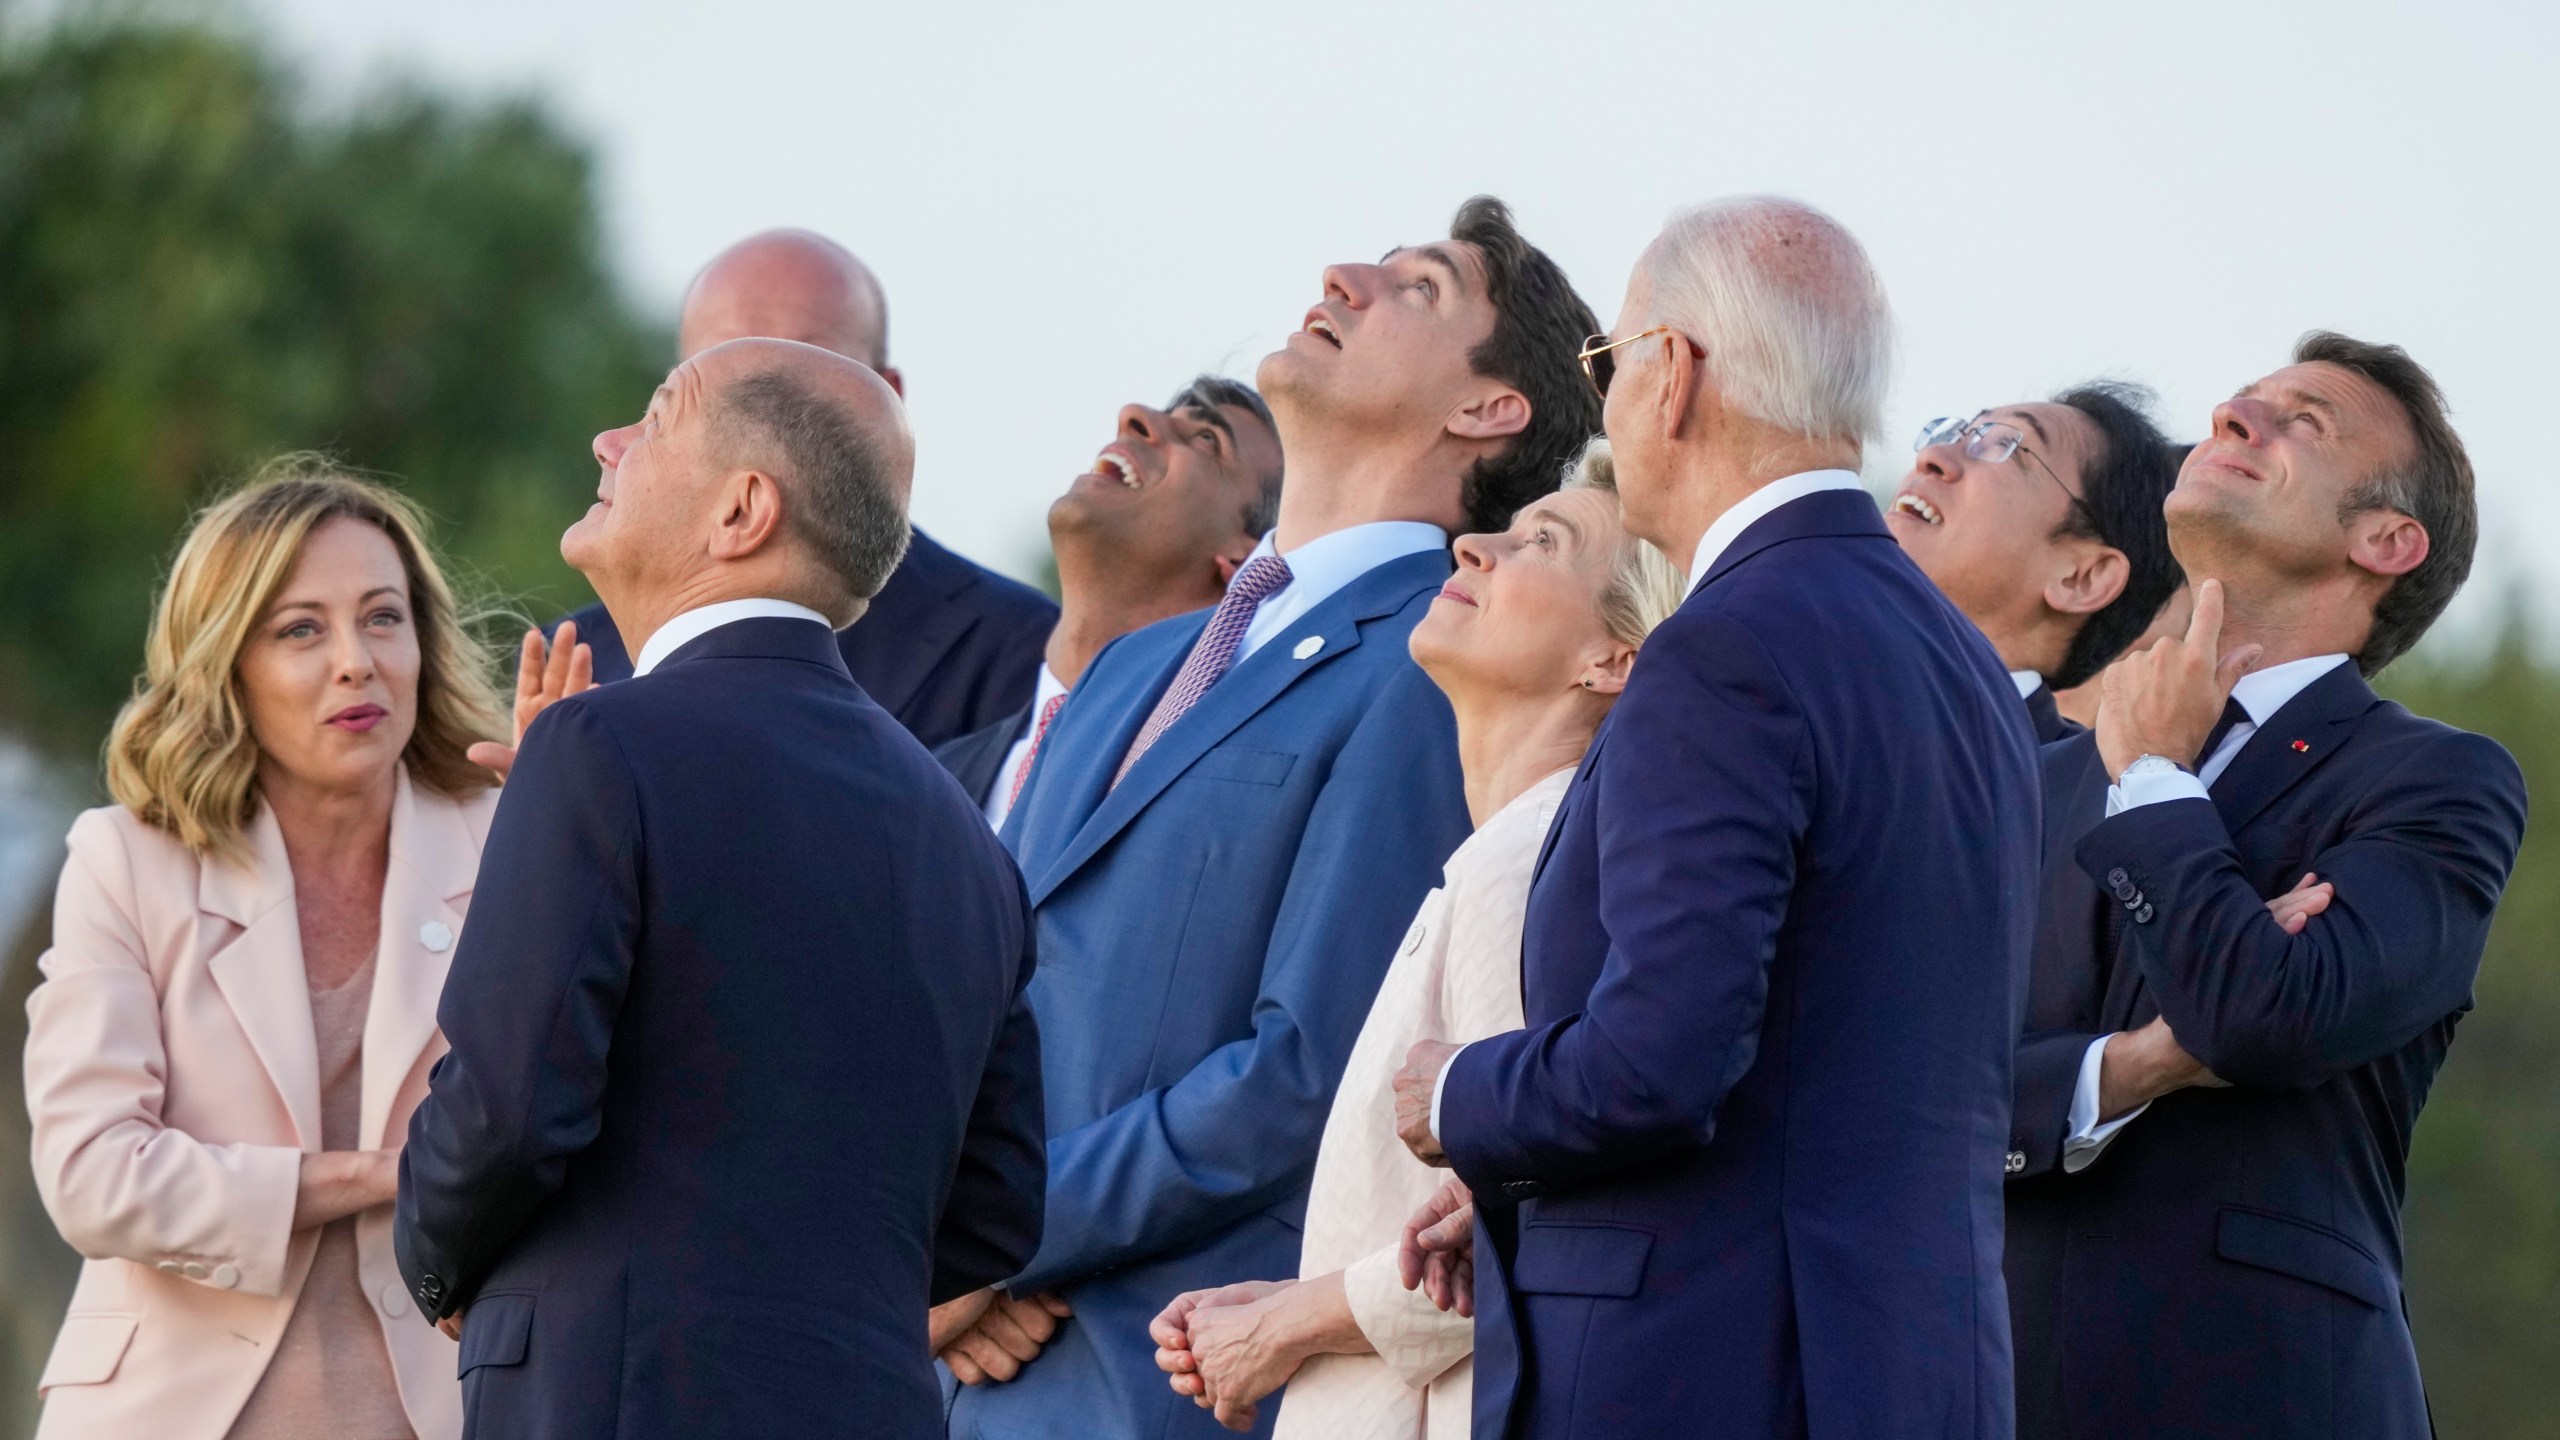 FILE - From right, French President Emmanuel Macron, Japan's Prime Minister Fumio Kishida, U.S. President Joe Biden, European Commission President Ursula von der Leyen, Canada's Prime Minister Justin Trudeau, Britain's Prime Minister Rishi Sunak, European Council President Charles Michel, German Chancellor Olaf Scholz and Italian Prime Minister Giorgia Meloni watch a skydiving demo during the G7 world leaders summit at Borgo Egnazia, Italy, Thursday, June 13, 2024. In France and Germany, the governments were weakened in elections this year. Italy is led by a prime minister whose party has neo-fascist roots, while an anti-immigrant party heads a shaky coalition in the Netherlands and Spain's Cabinet relies on small parties to rule. (AP Photo/Luca Bruno, File)